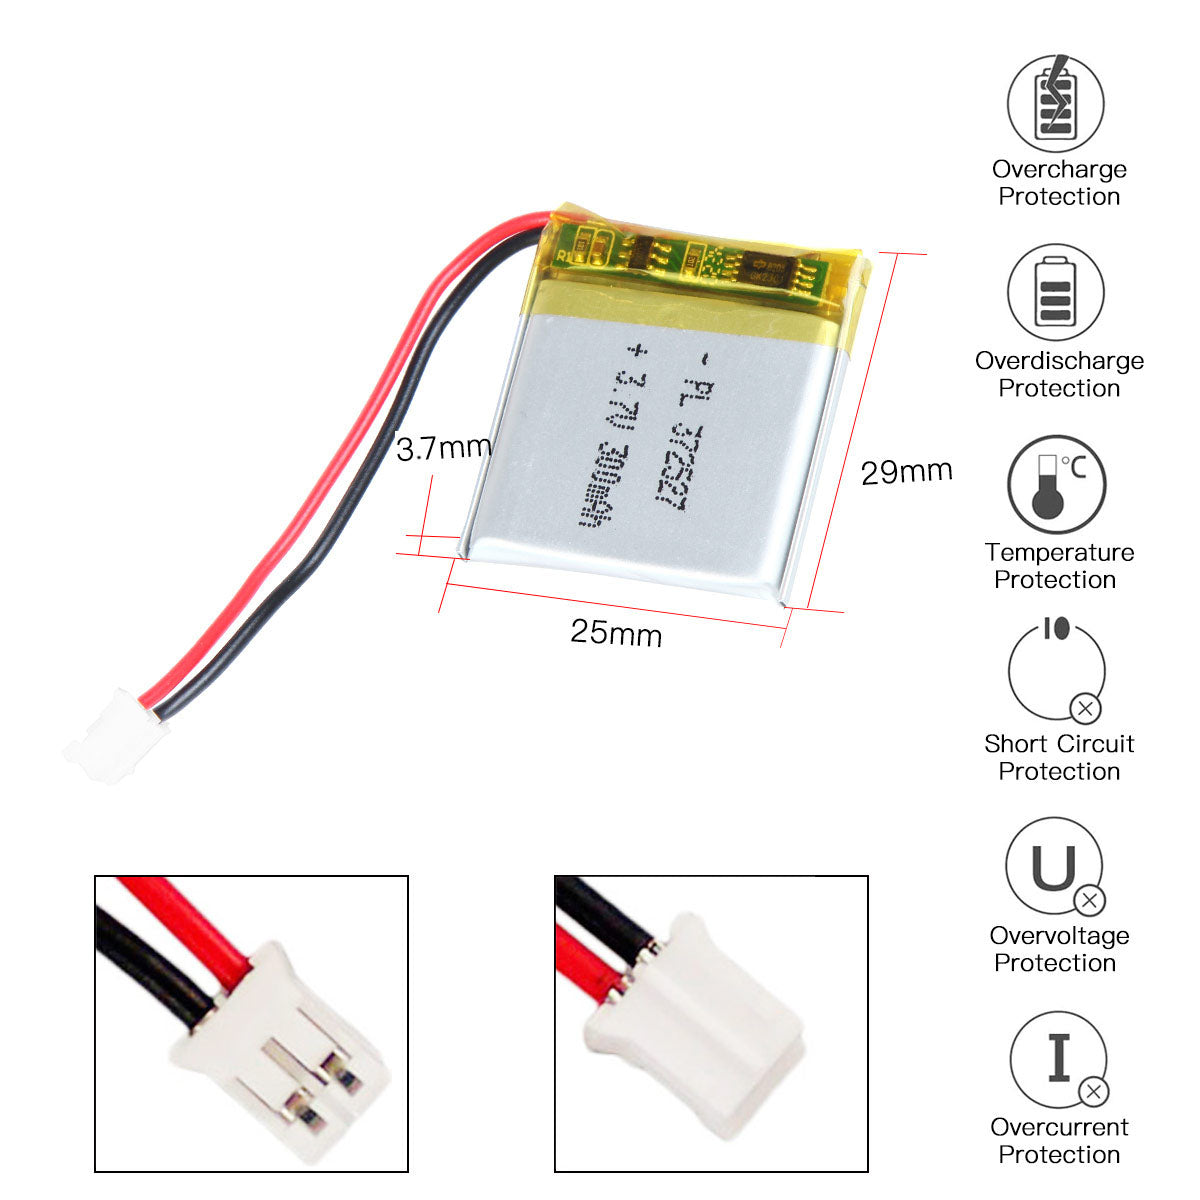 YDL 3.7V 300mAh 372527 Rechargeable Lithium Polymer Battery Length 29mm